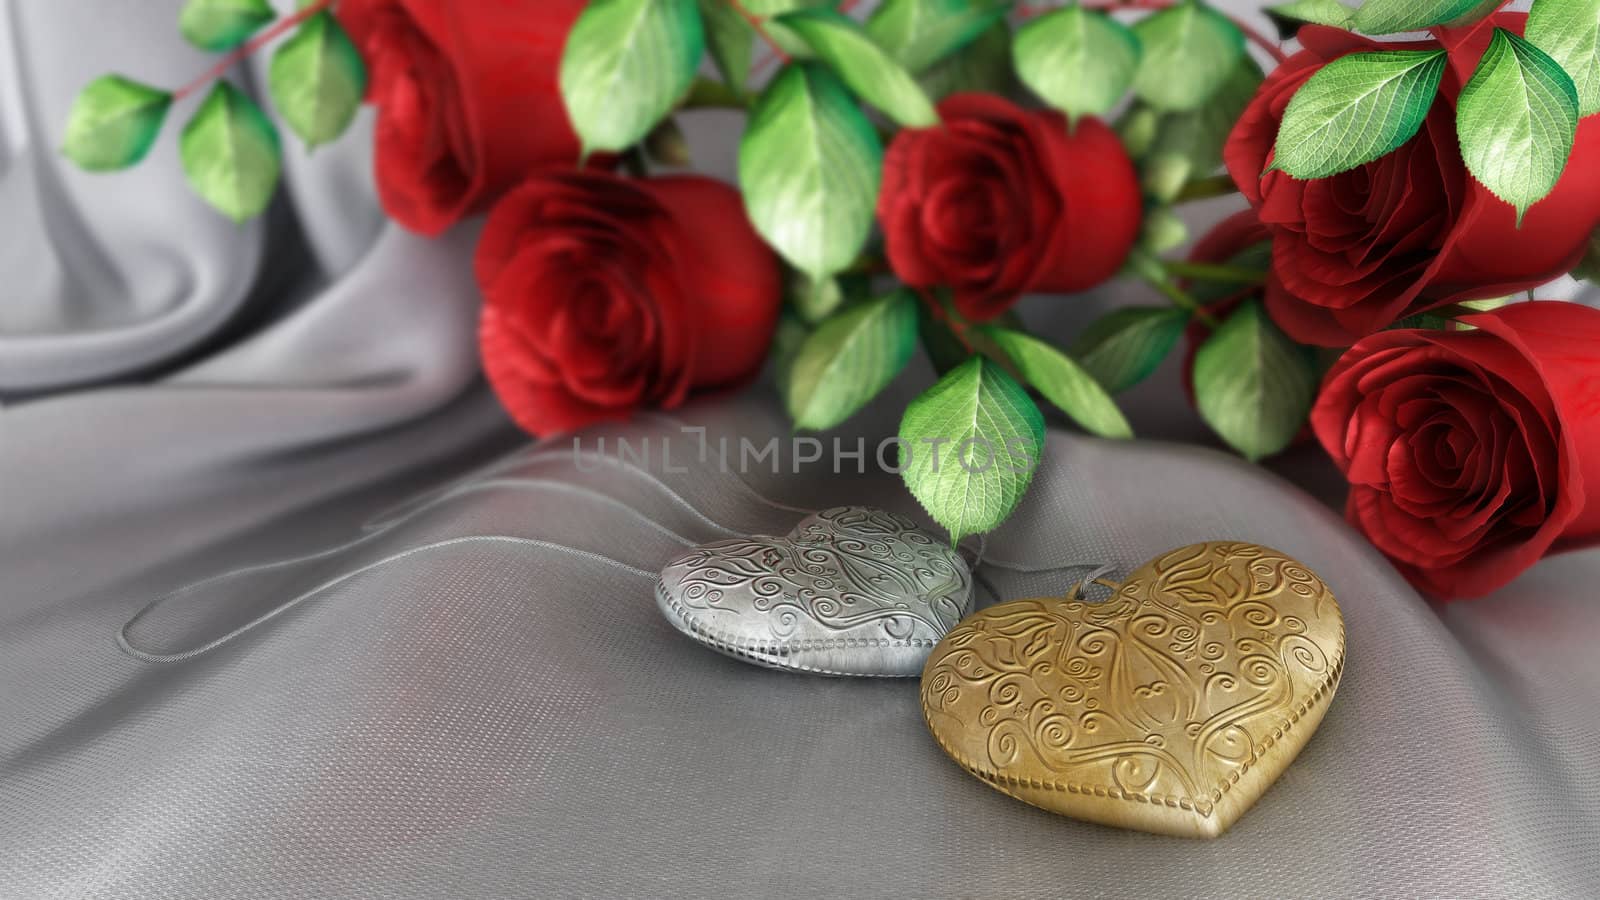 holiday and wedding background with roses, jewelry and fabric